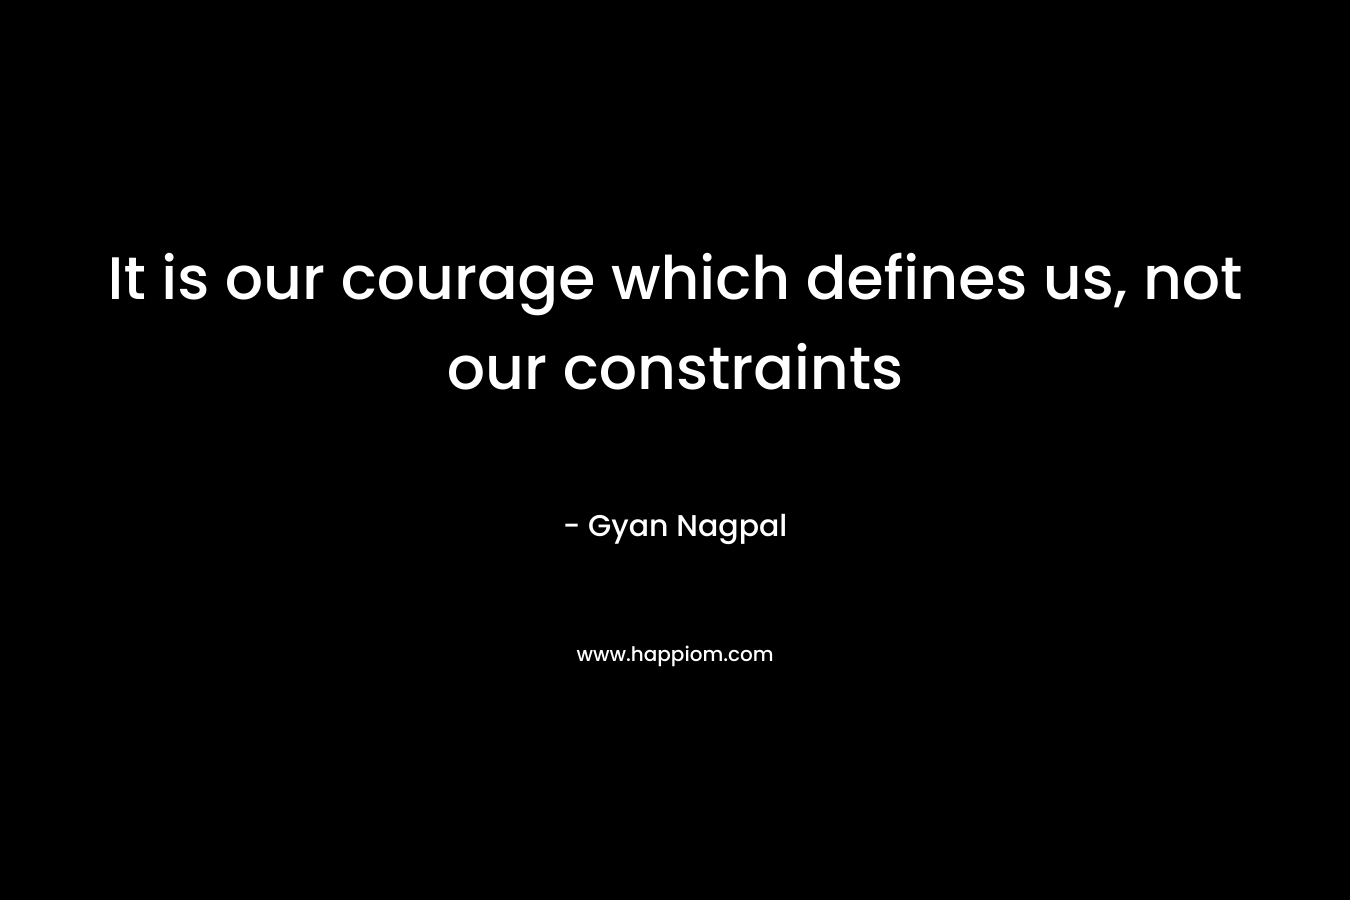 It is our courage which defines us, not our constraints